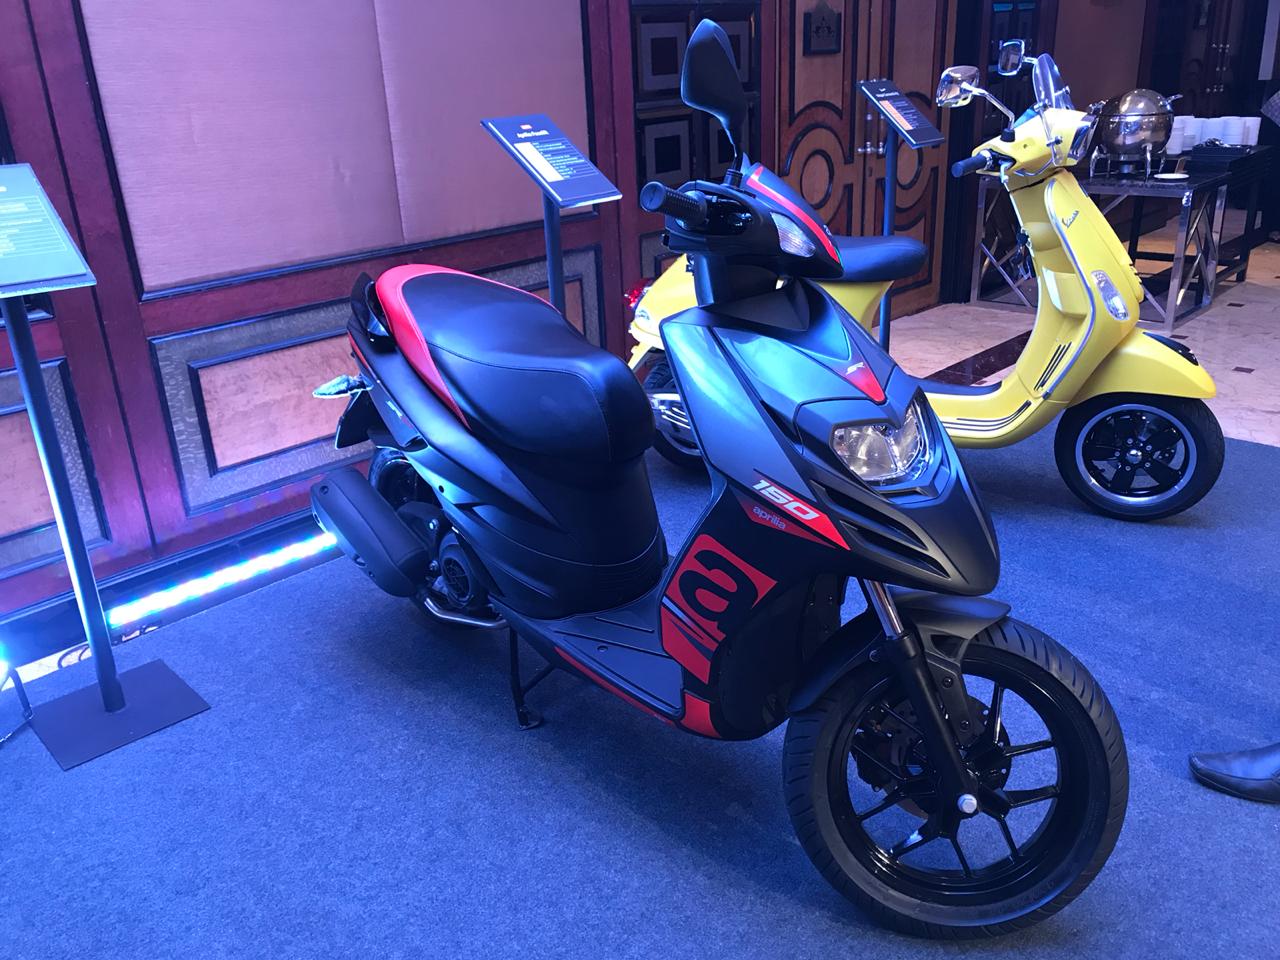 <p>The Aprilia SR 150 Race and select models from the Vespa family also get a new mobile app-based connectivity feature that offers GPS information regarding the scooter&rsquo;s location, owner&rsquo;s emergency contact details and also location of the nearest service centre.</p>